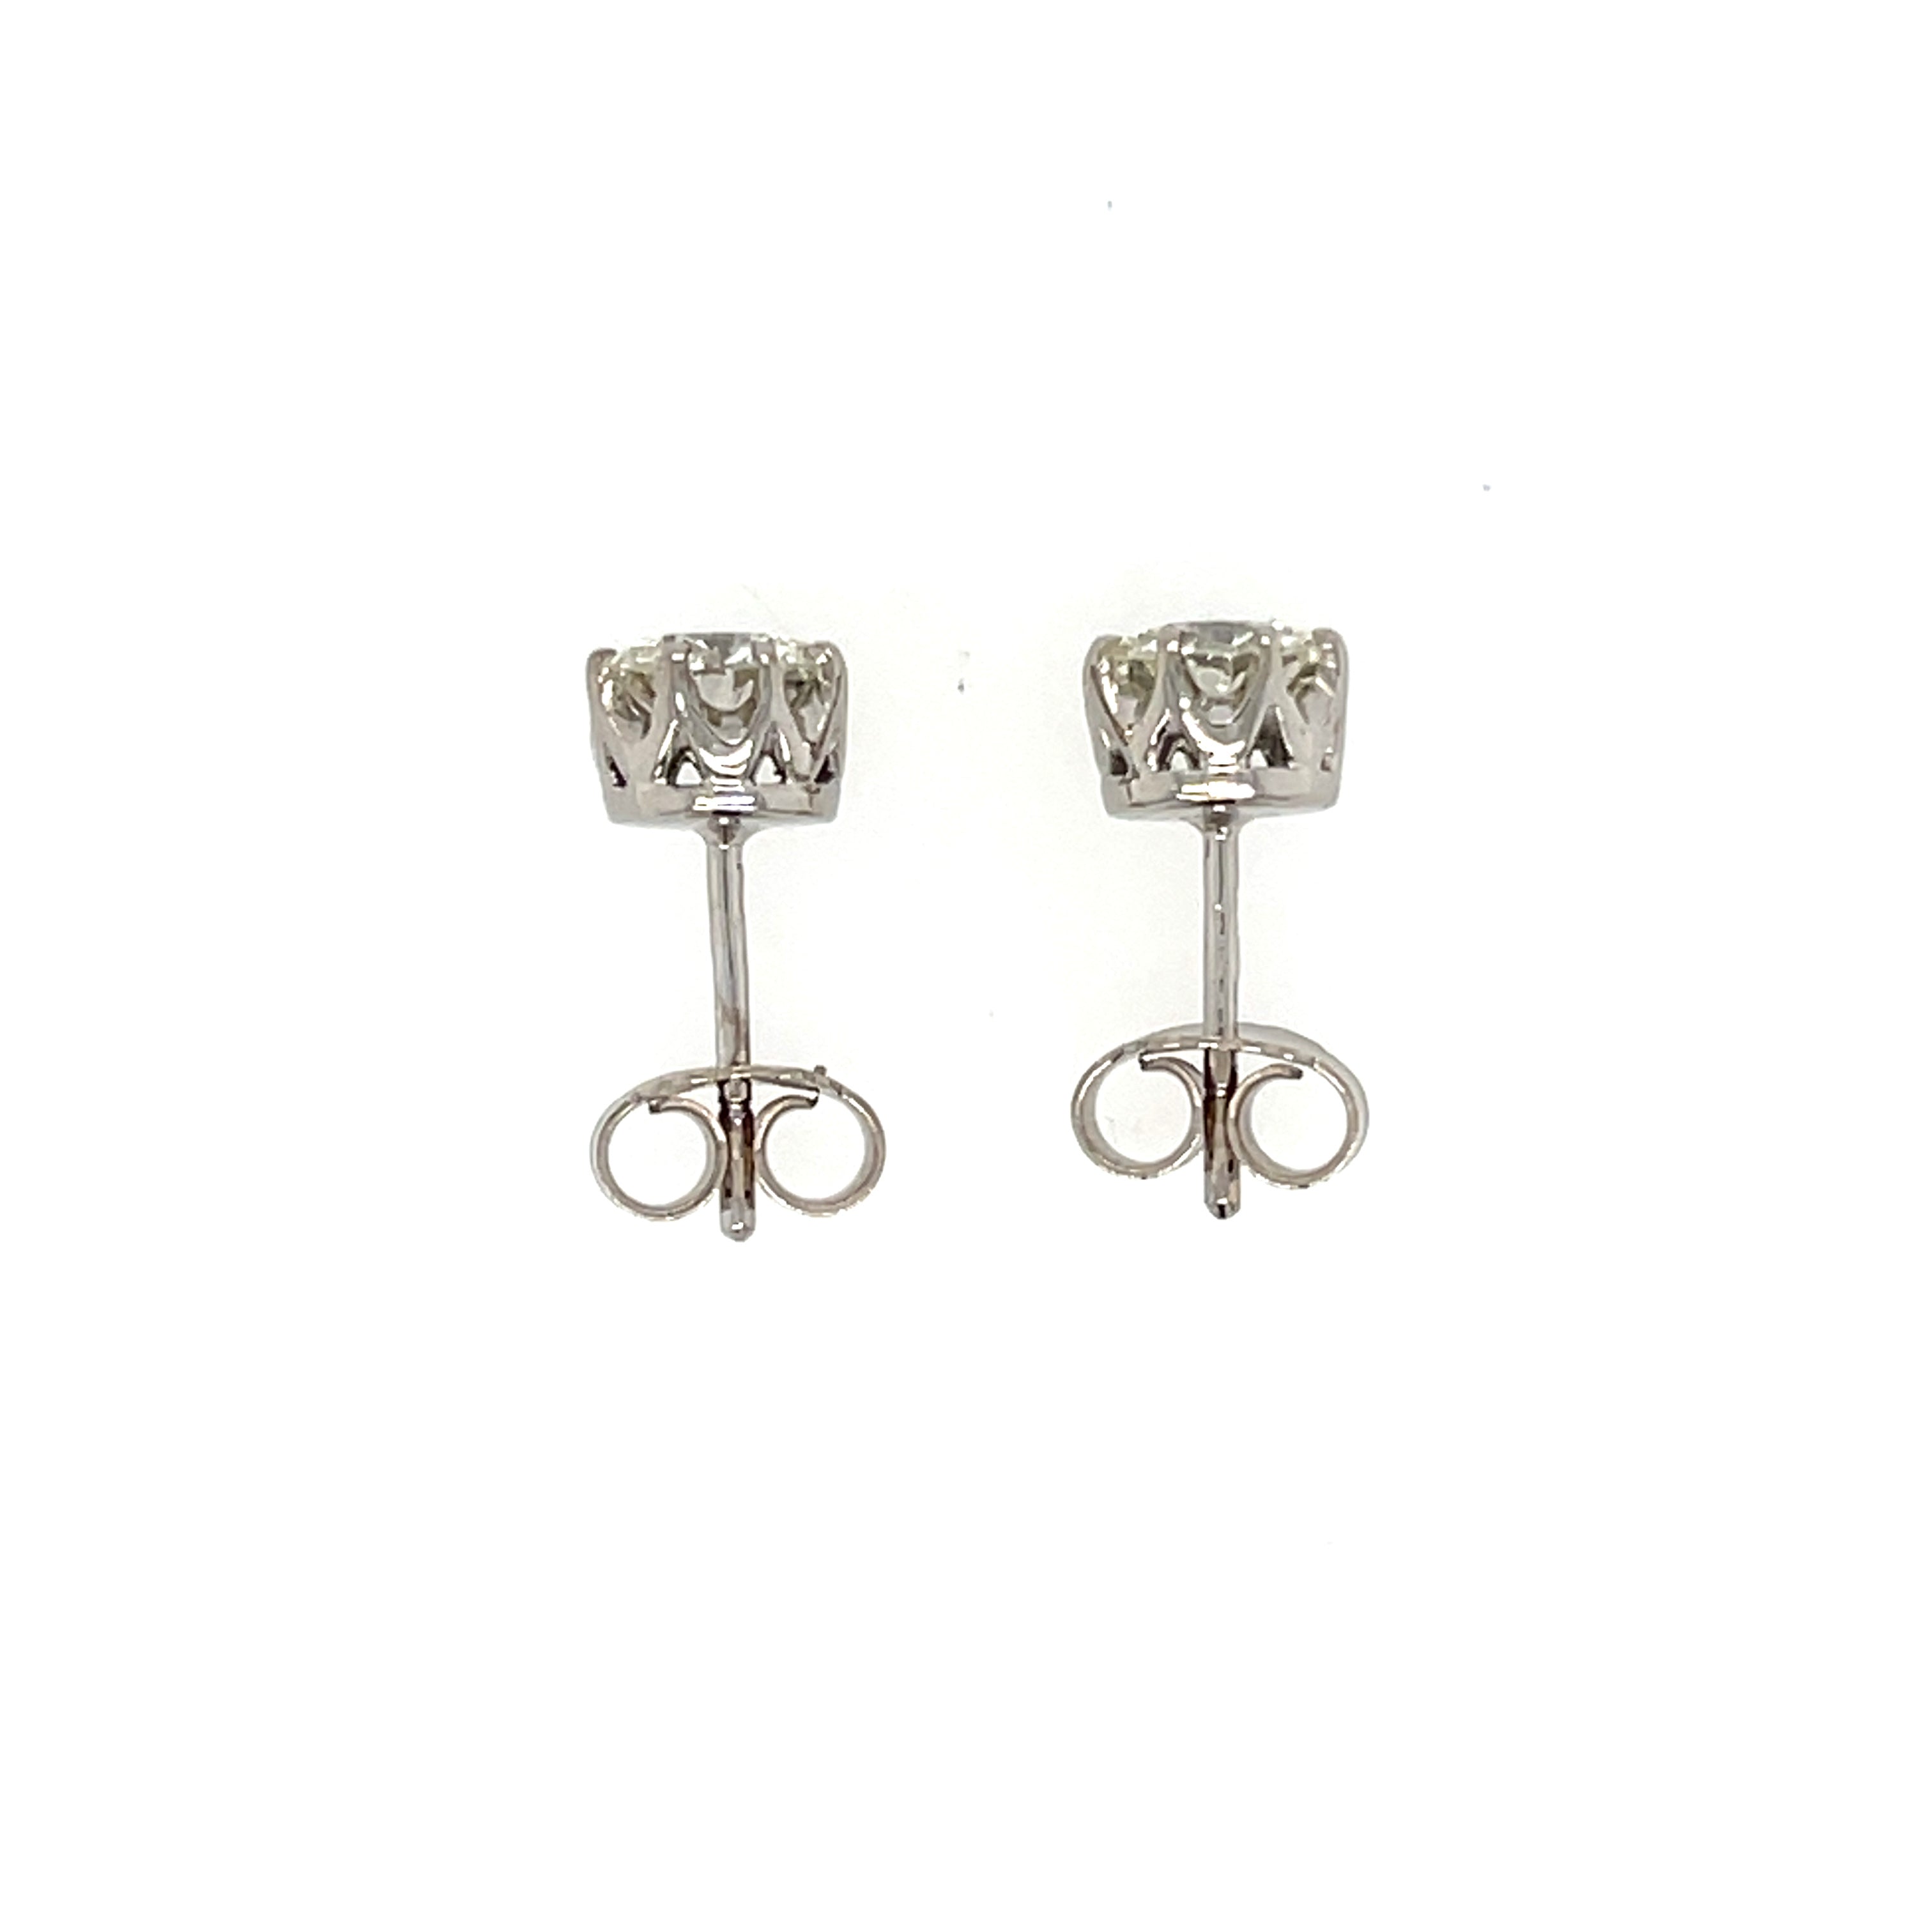 1.60ct Round Brilliant Cut Diamond Solitaire Stud Earrings 18ct White Gold